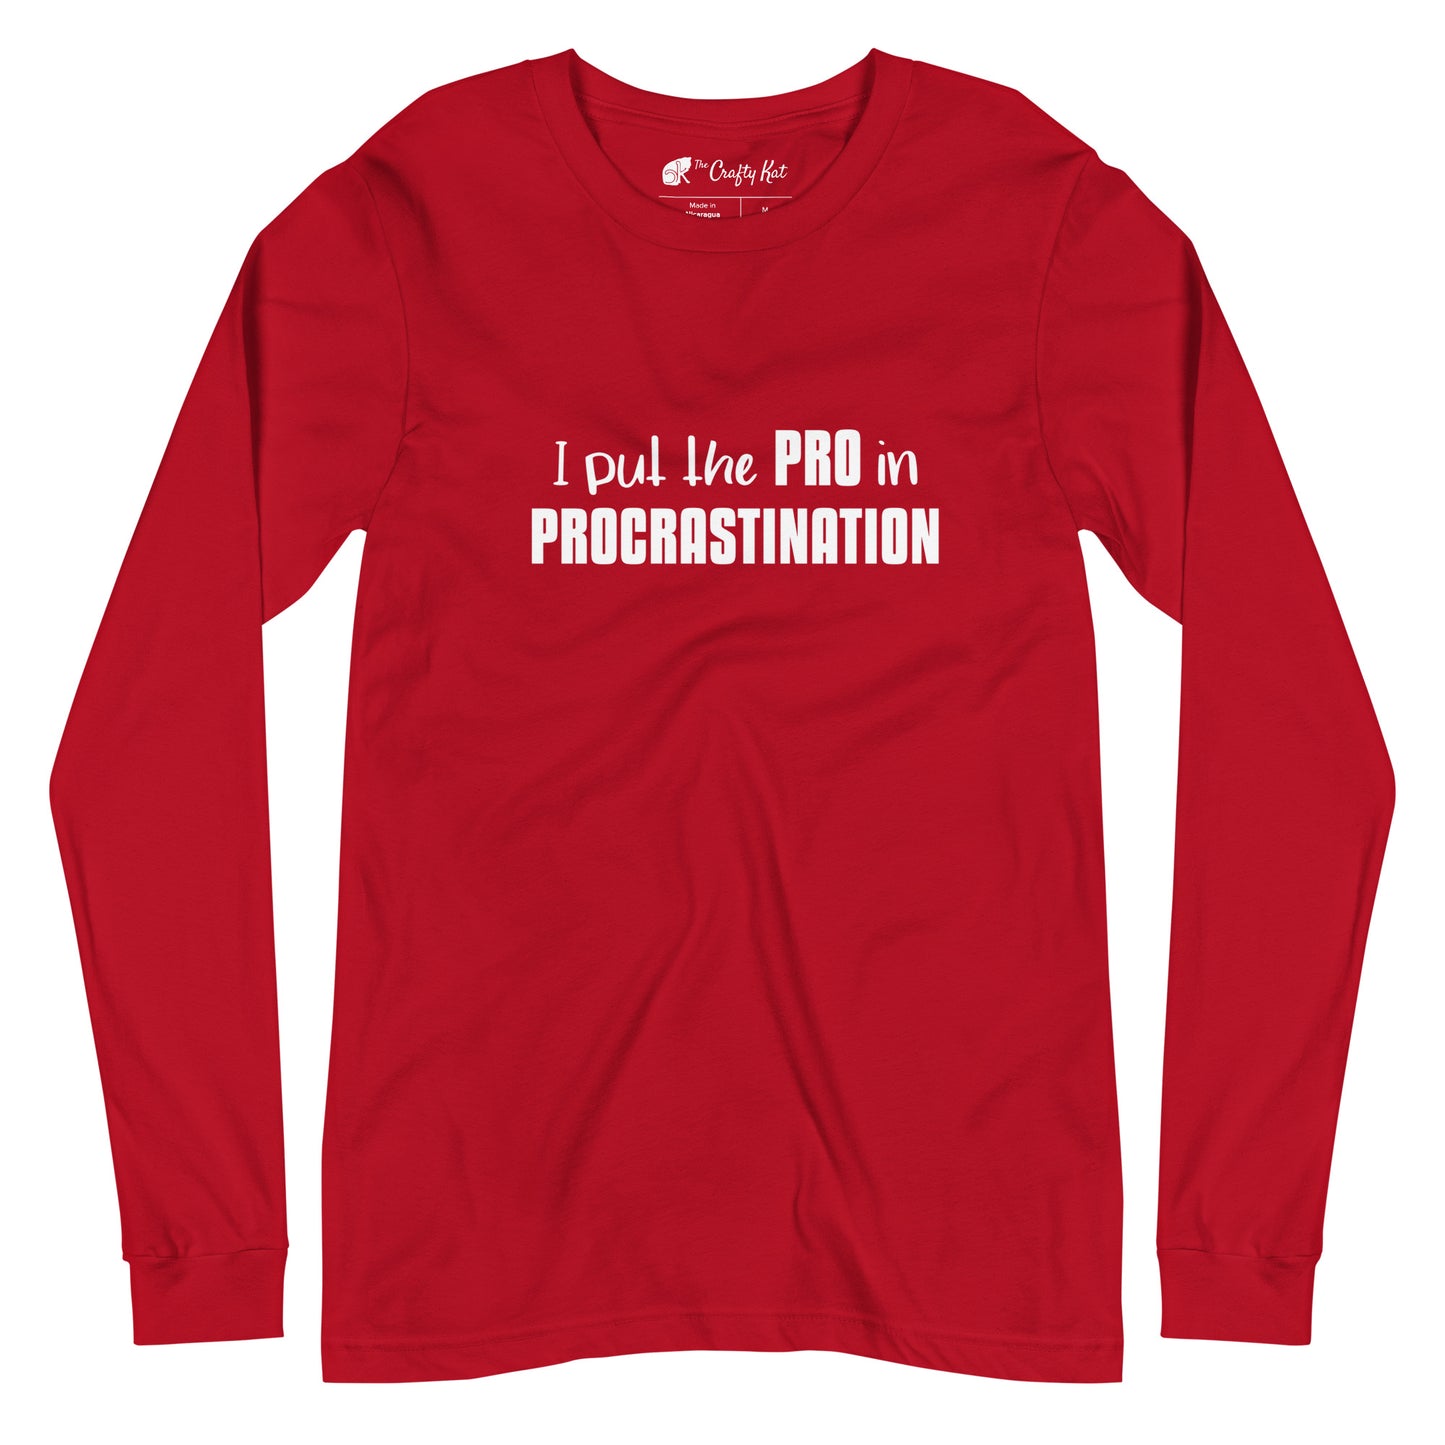 Red long-sleeve shirt with text graphic: "I put the PRO in PROCRASTINATION"